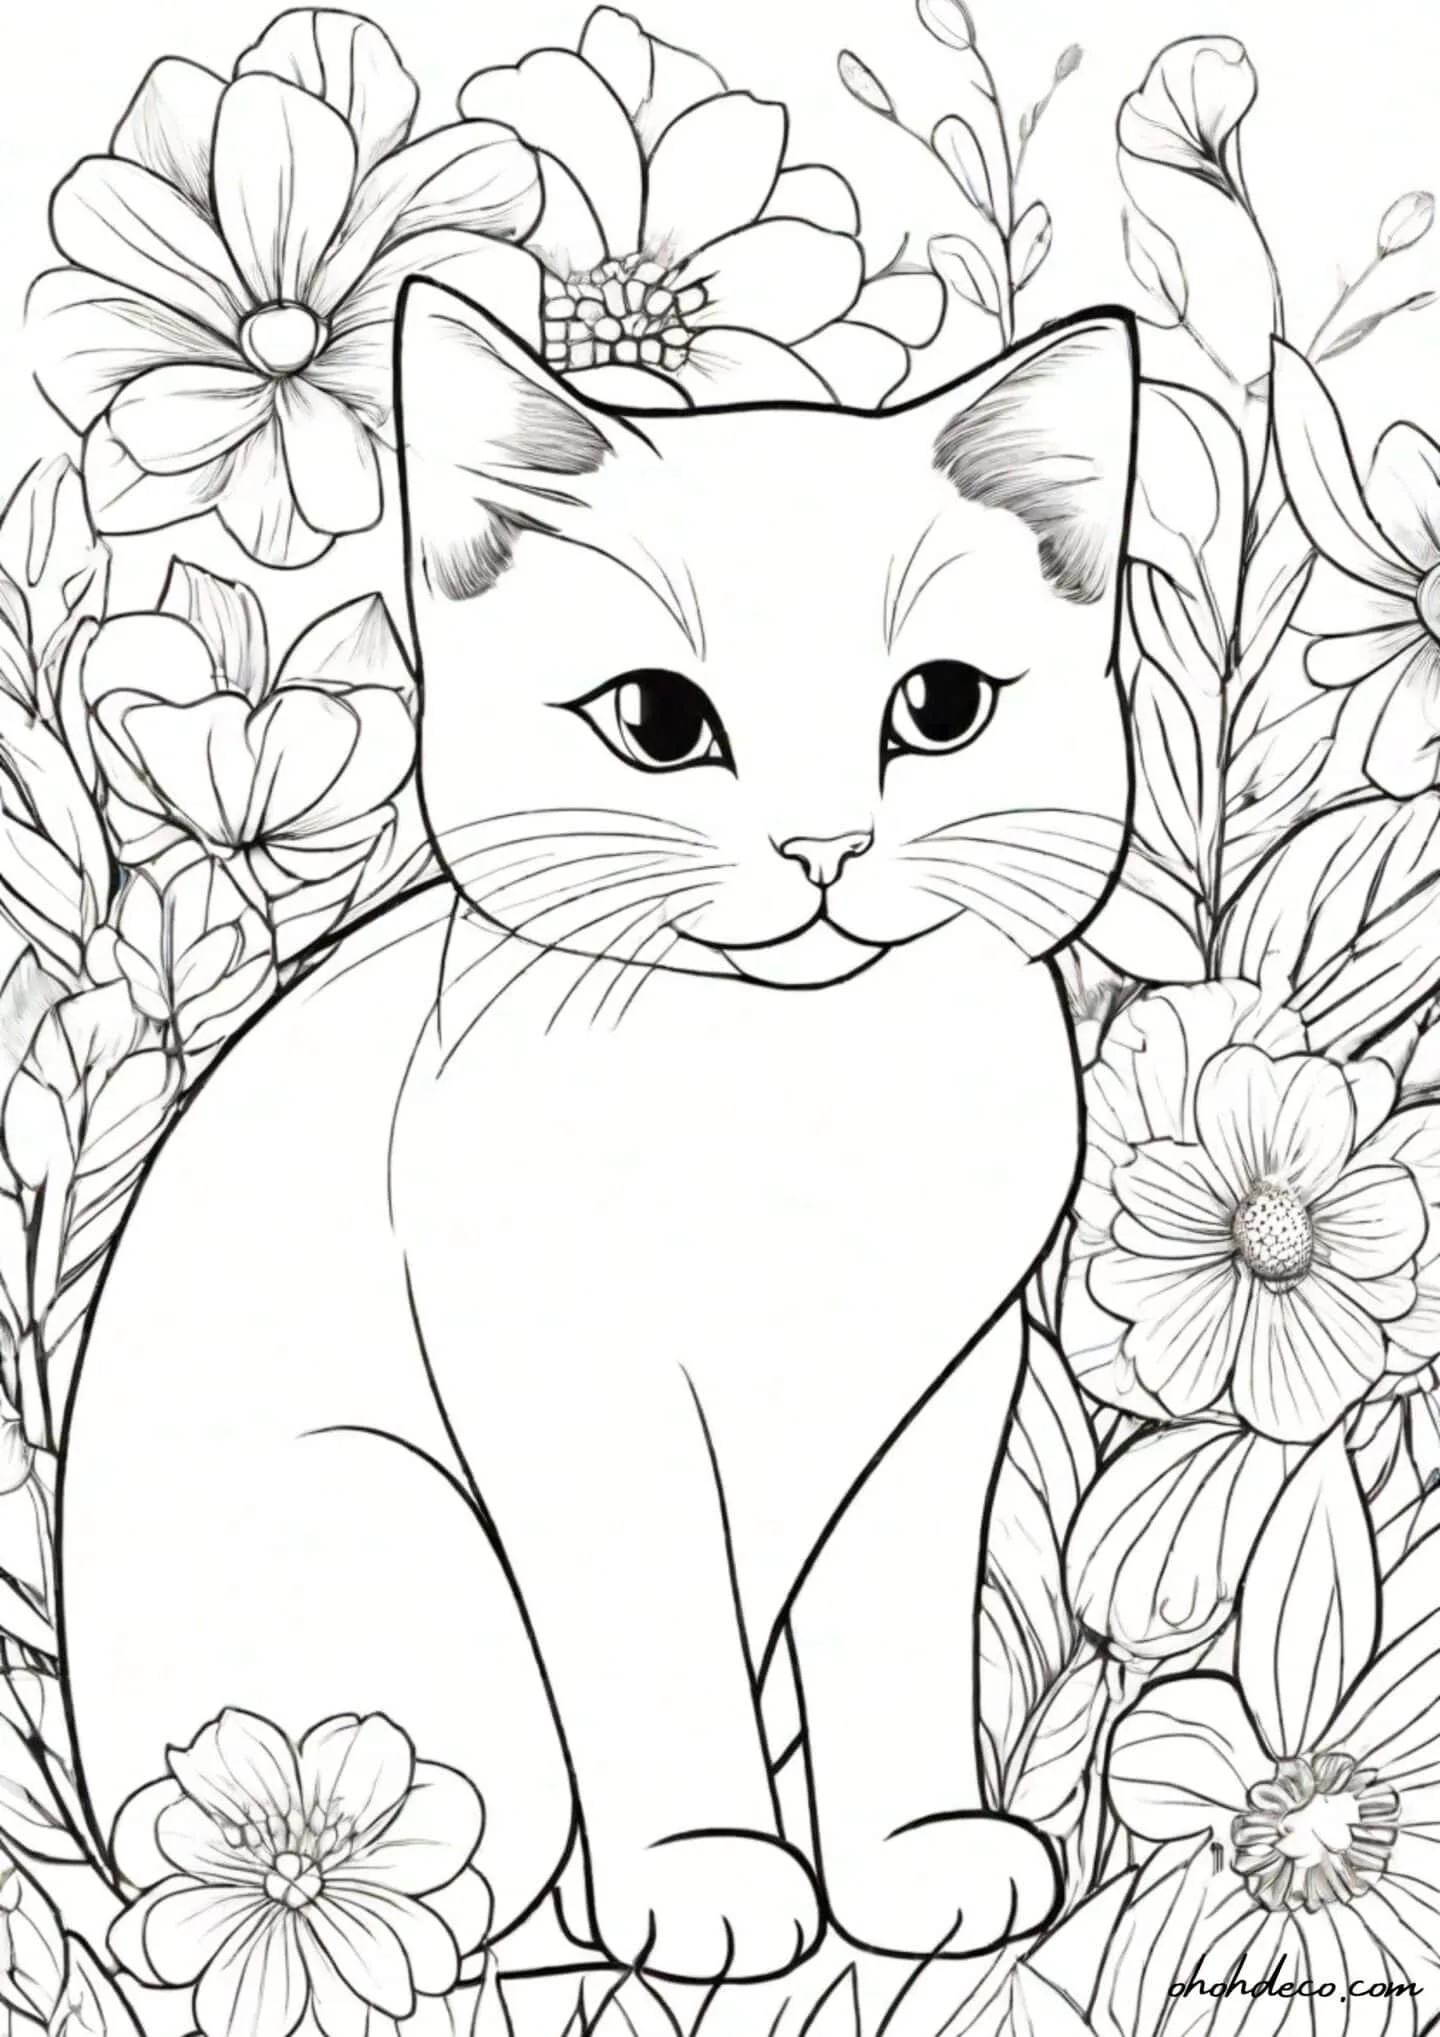 cat and flowers coloring page